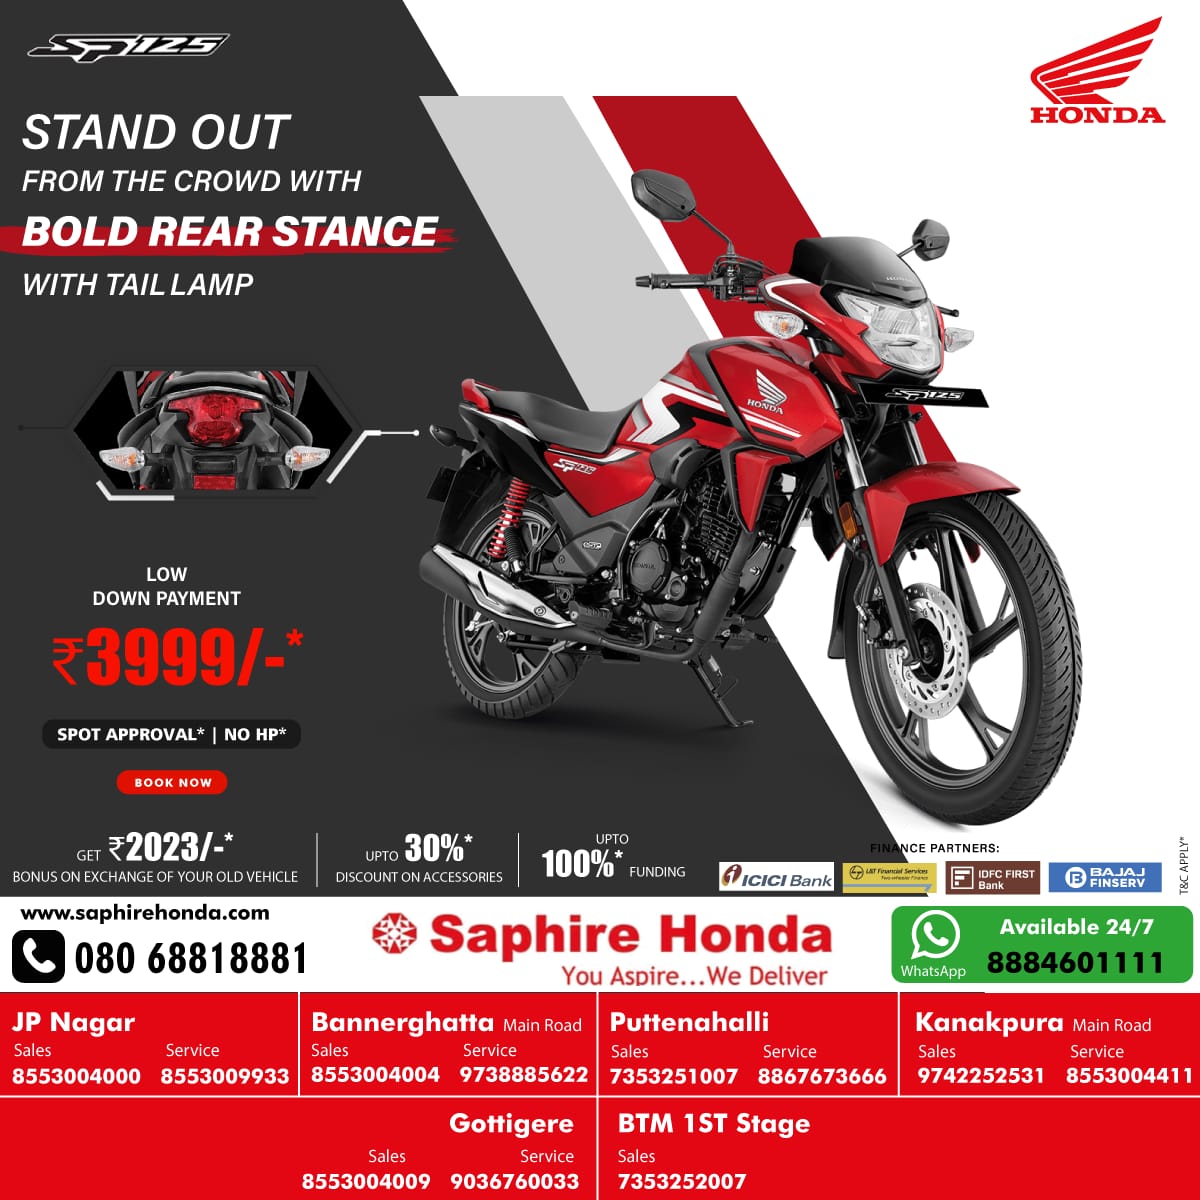 A Ride that is Beyond Advanced  #HondaSP125 with Stand Out Frome the Chrome With Bold Bear Stance With Tail Lamp at a
✅Low down payment ₹3999/-*
✅Get an Exchange bonus for an old vehicle ₹2023/-
✅Discounts on accessories up to 30%
✅Upto 100% Funding
✅Spot Approval
✅No HP